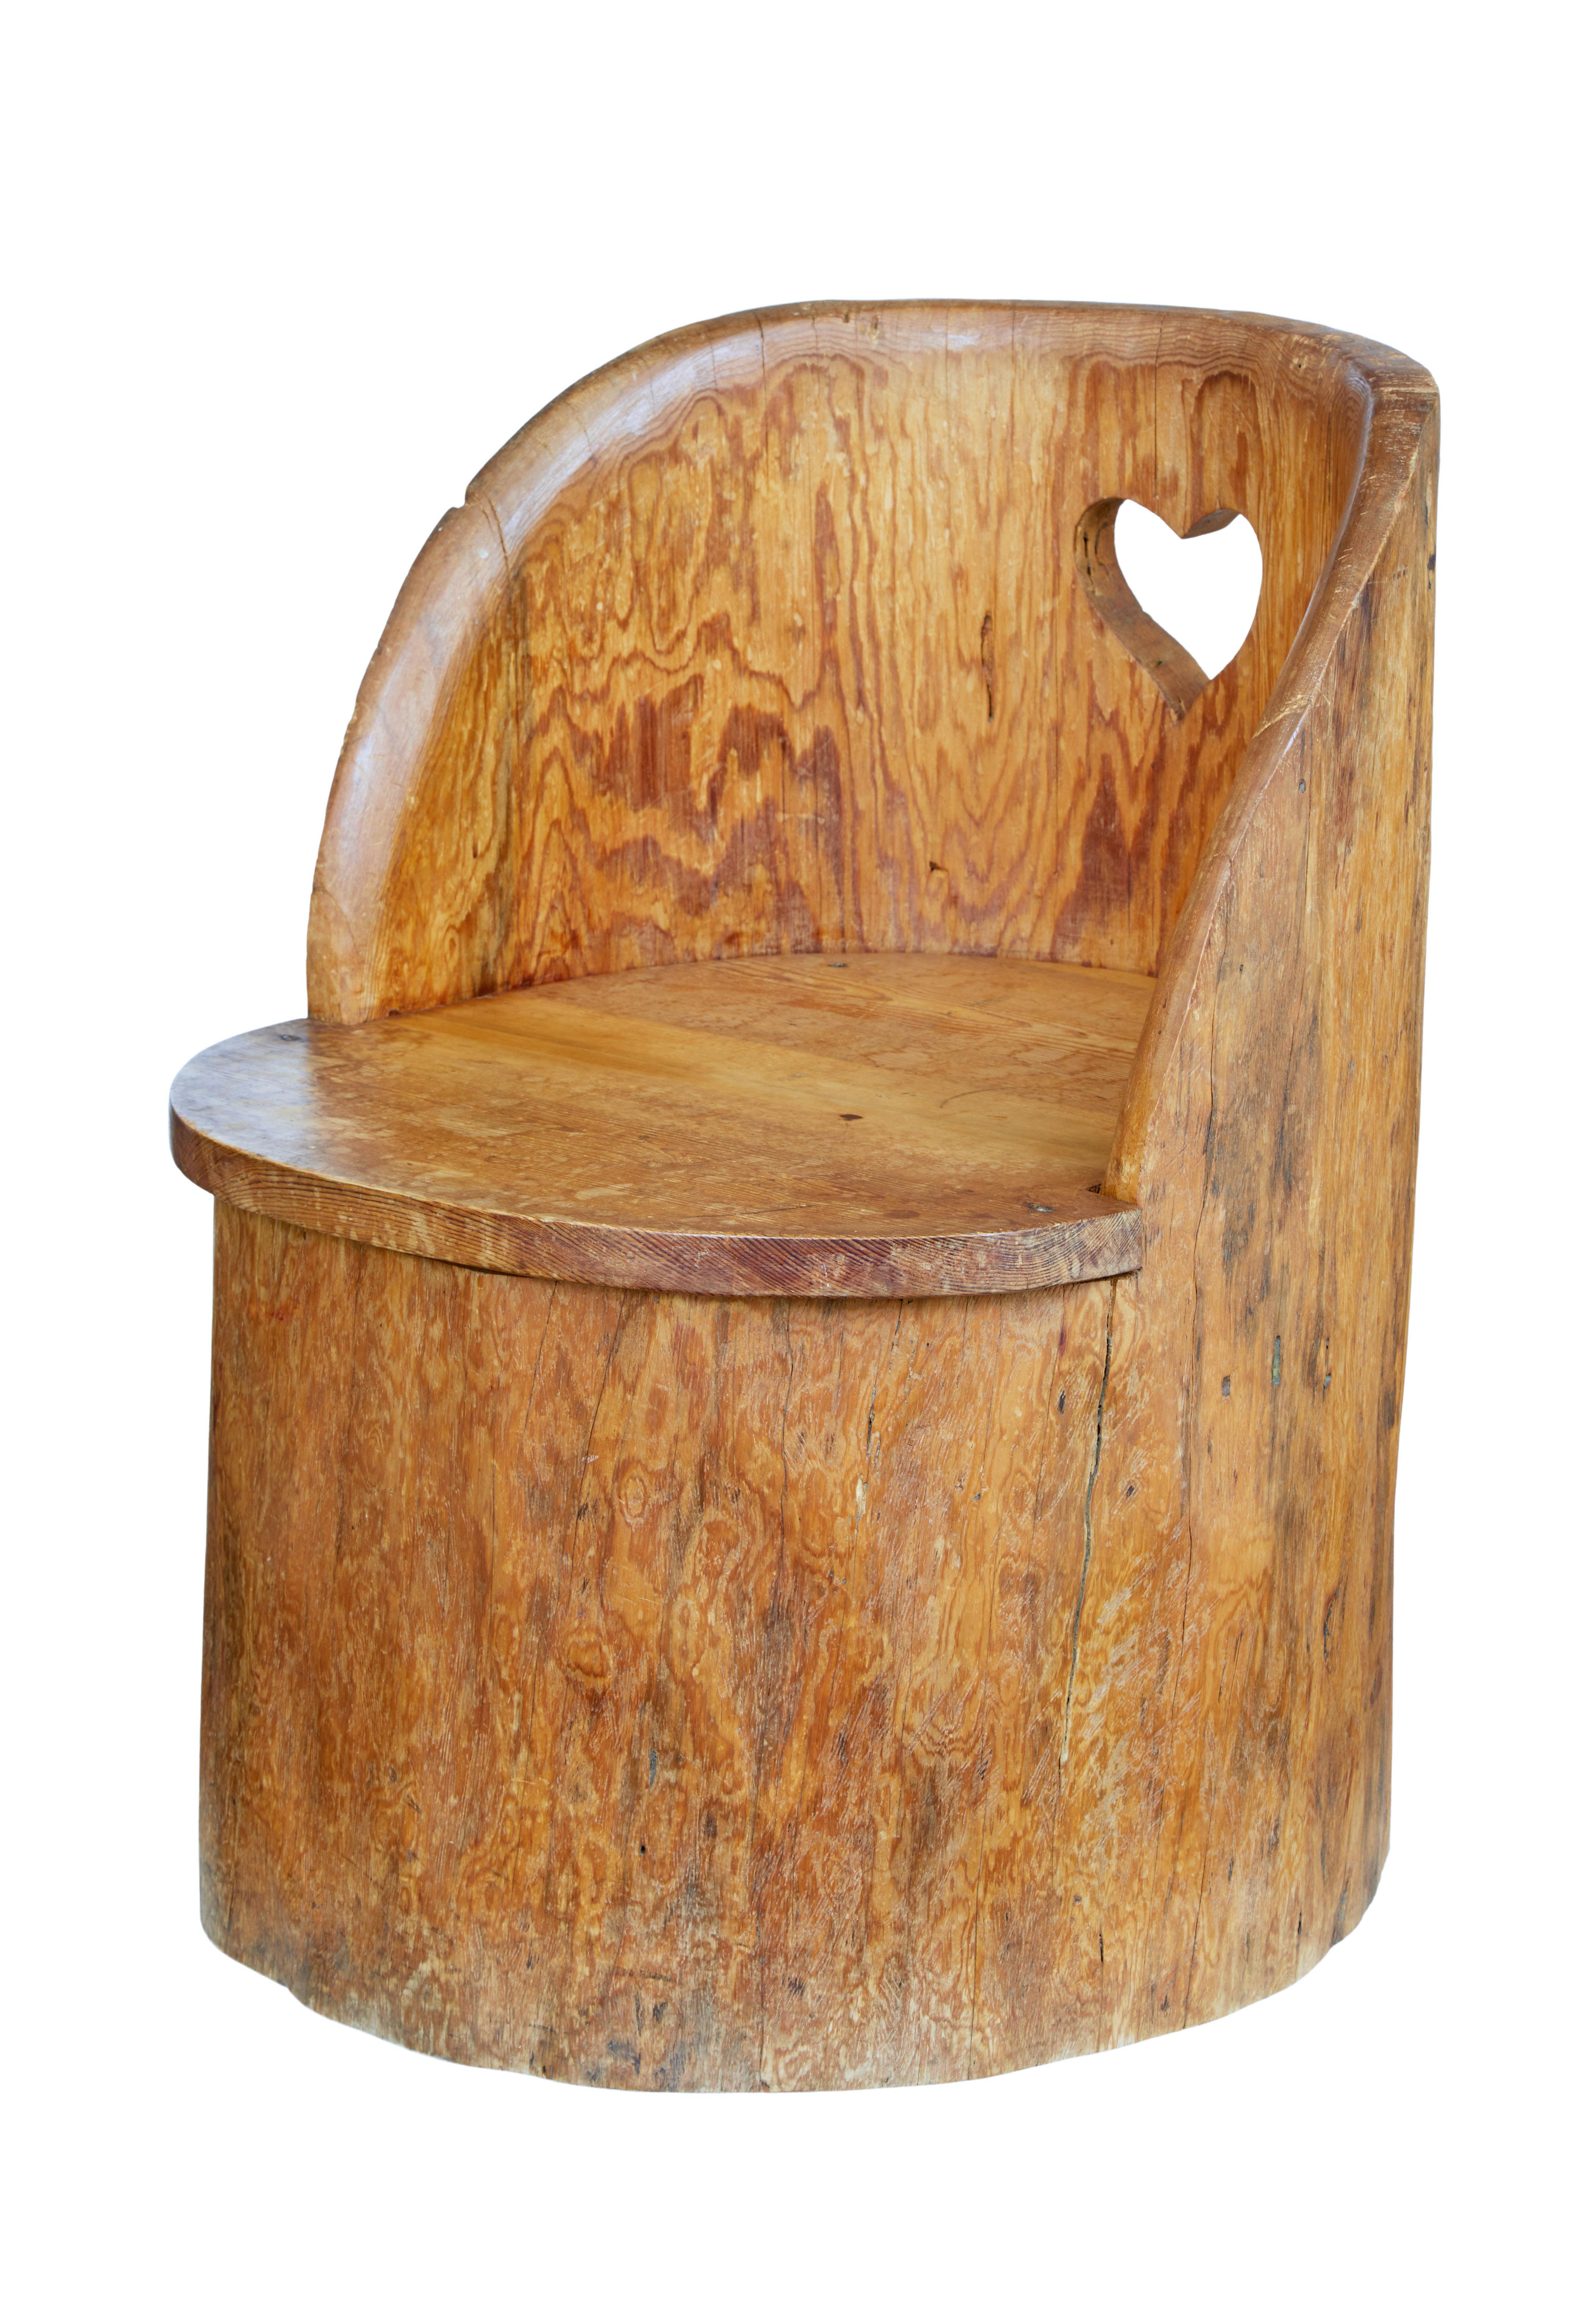 Swedish 19th Century Large Dugout Rustic Pine Chair